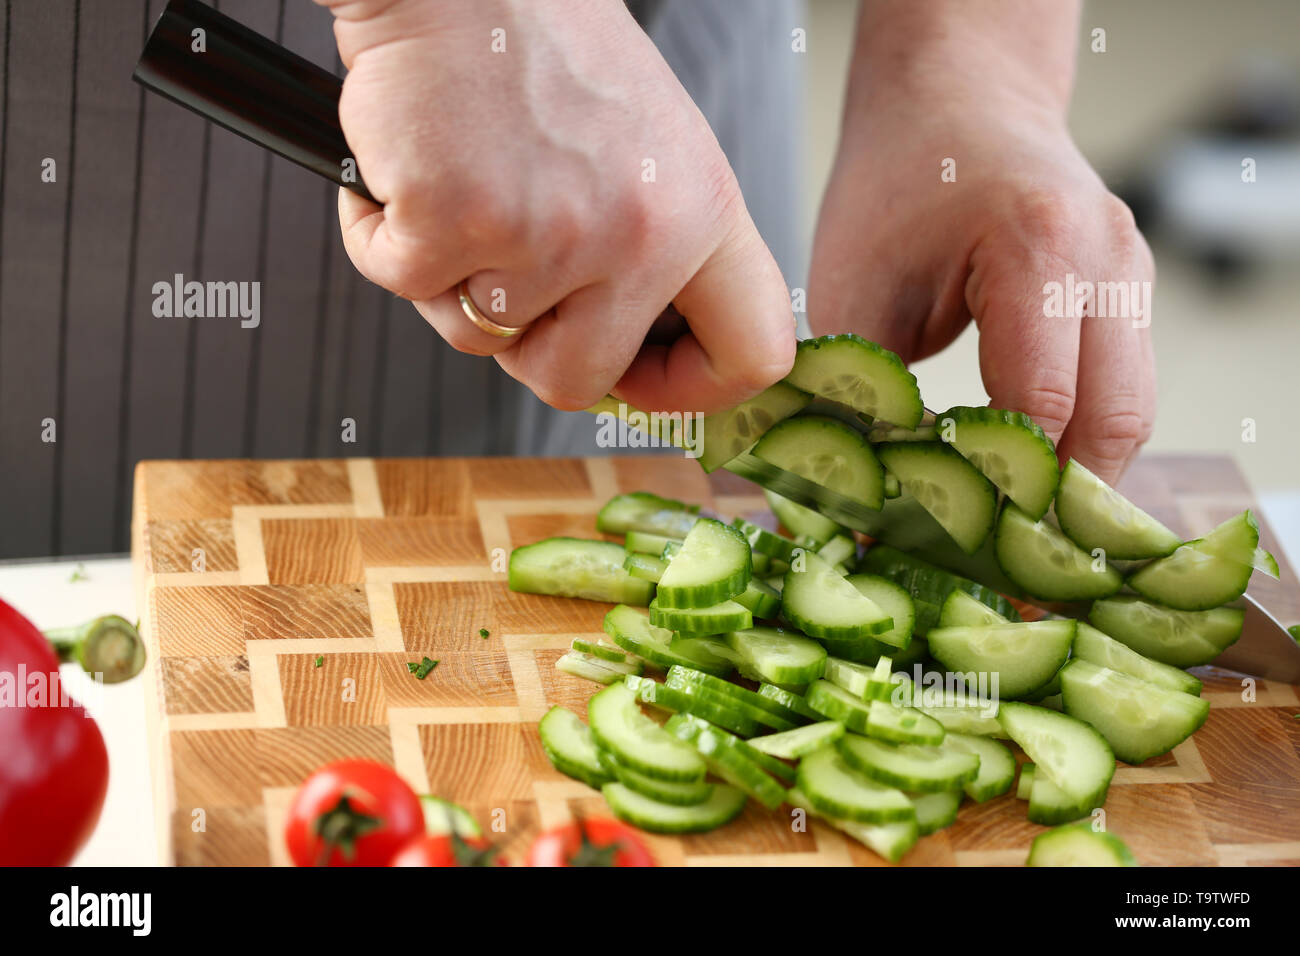 Culinary Male Chopping Green Dieting Cucumber Stock Photo